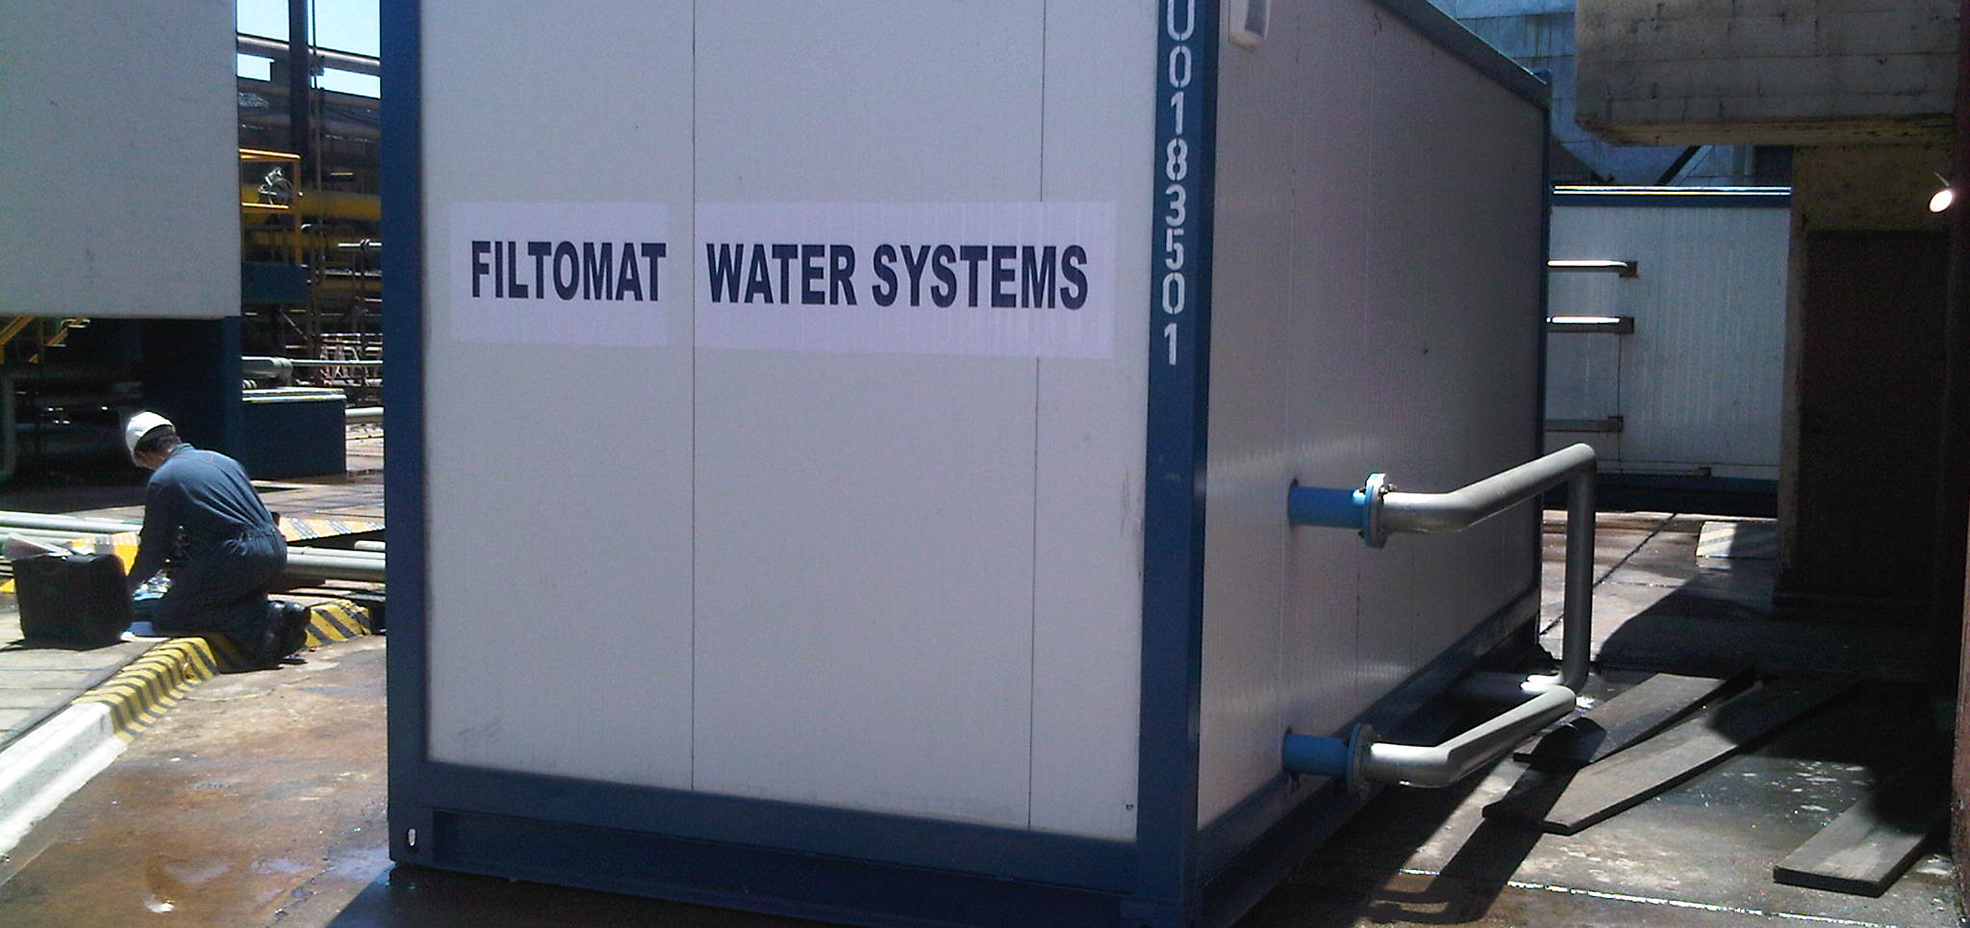 Filtomat Water Systems | Filtros Industriales